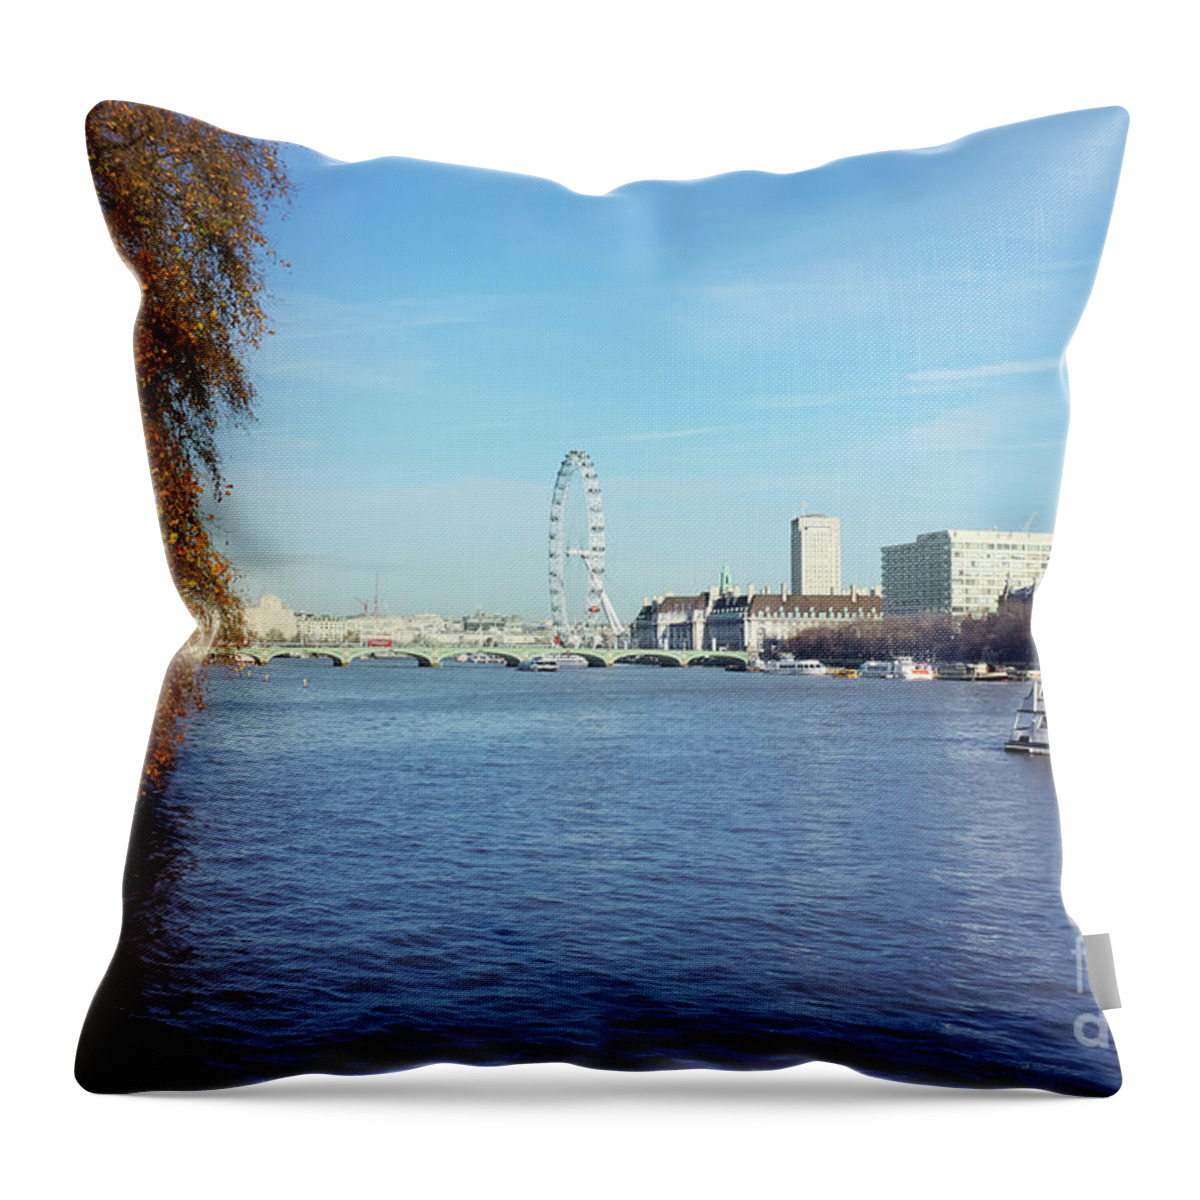 Thames Throw Pillow featuring the photograph River Thames London by Terri Waters